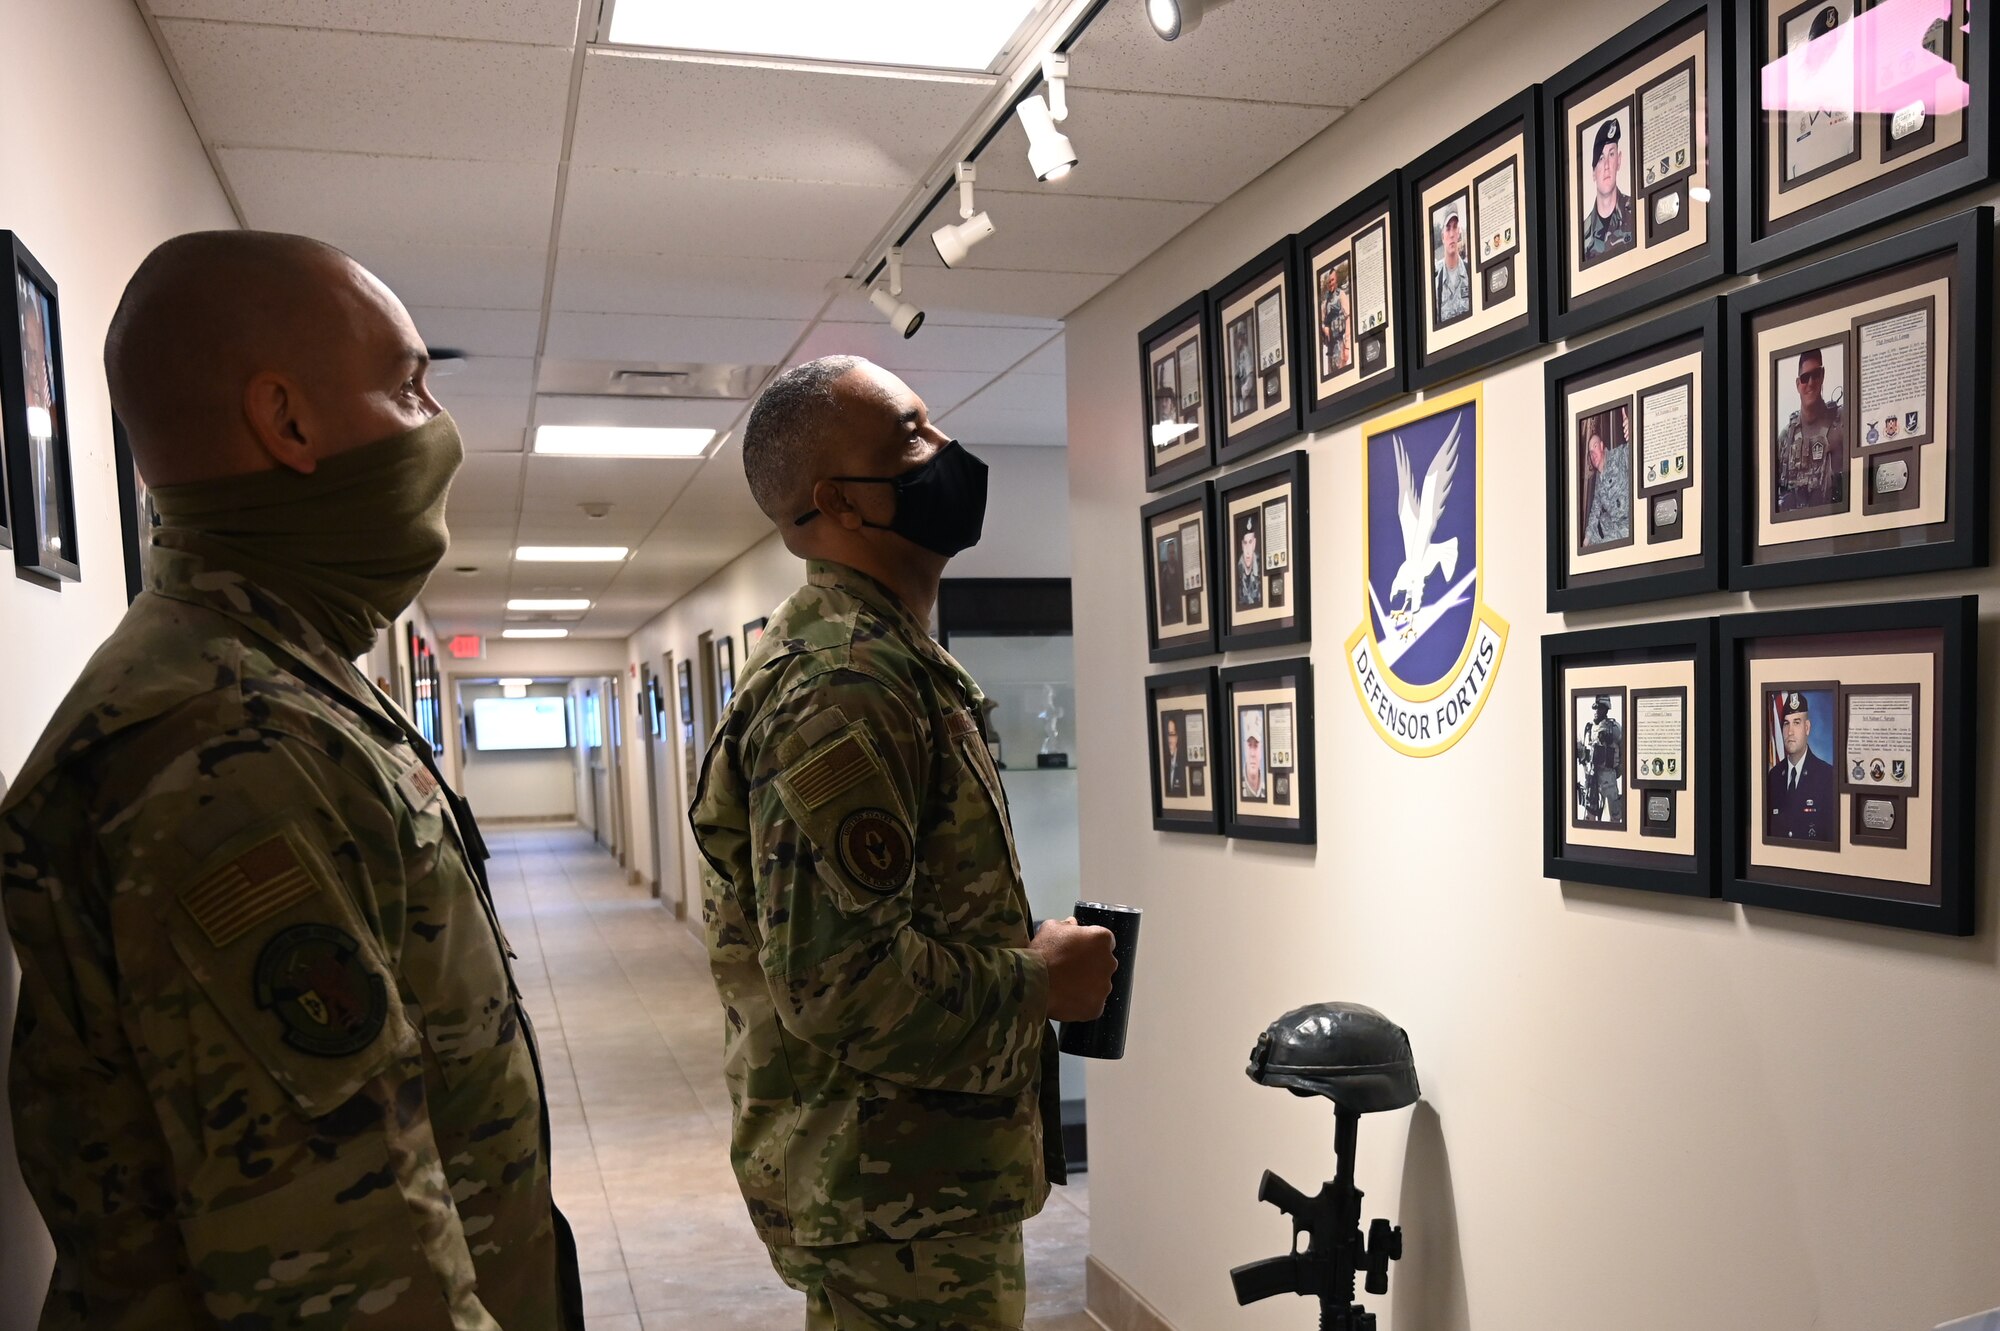 Chief Master Sgt. Timothy C. White, the Air Force Reserve Command Chief, observes the wall of fallen Airmen in the 911th Security Forces Squadron with Chief Master Sgt. Justin Hovancik, 911th SFS operations superintendent, at the Pittsburgh International Airport Air Reserve Station, Pennsylvania, Jan. 8, 2022.